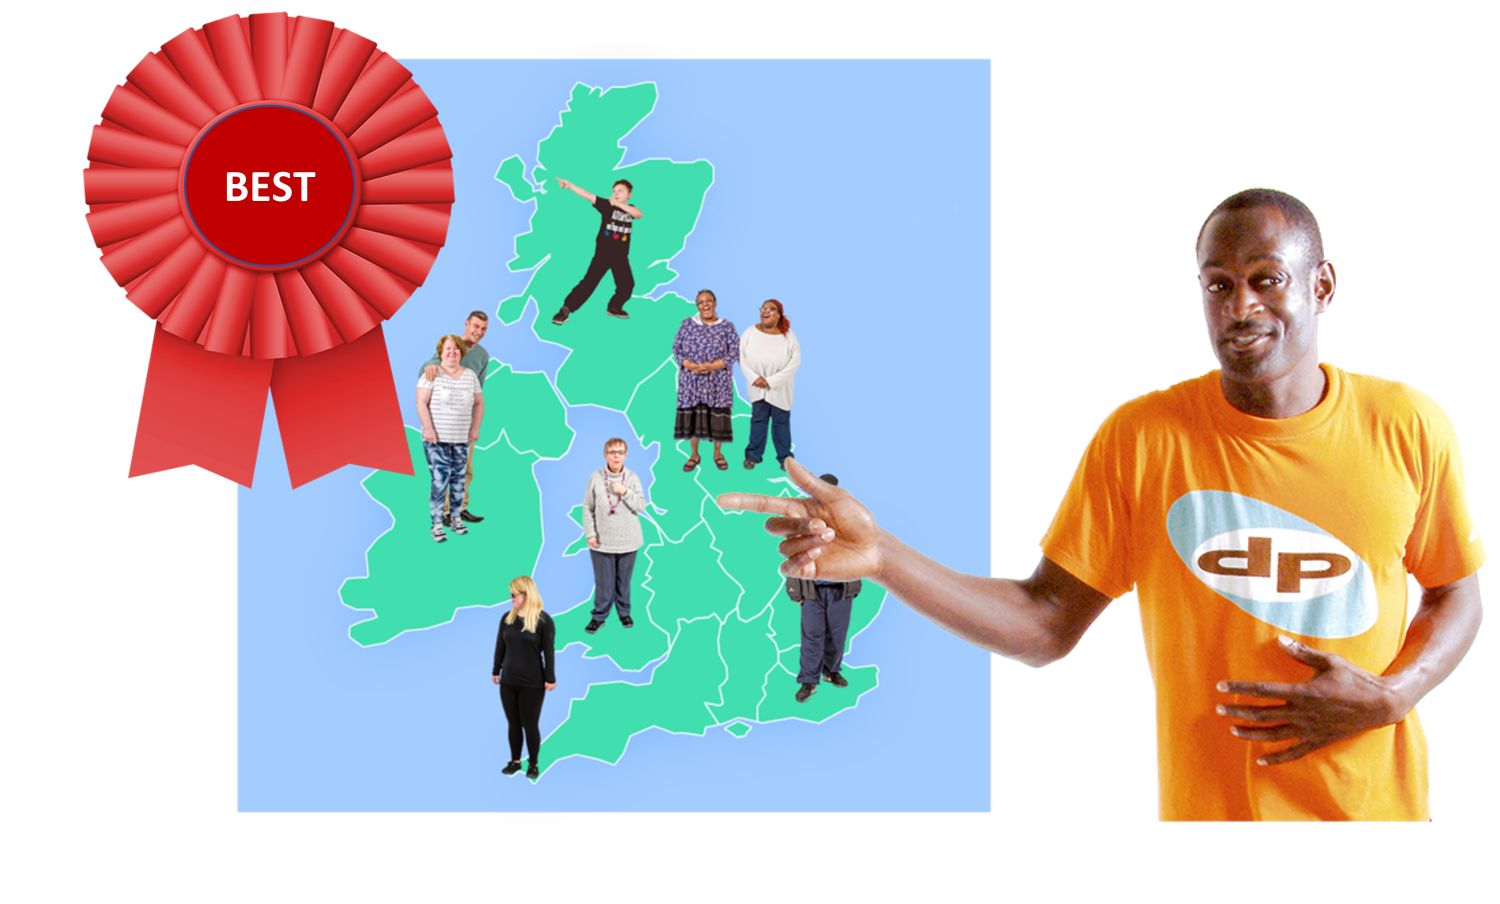 A man pointing to a map of the UK which shows people standing on the map. There is a red rosette on the map which says 'Best'